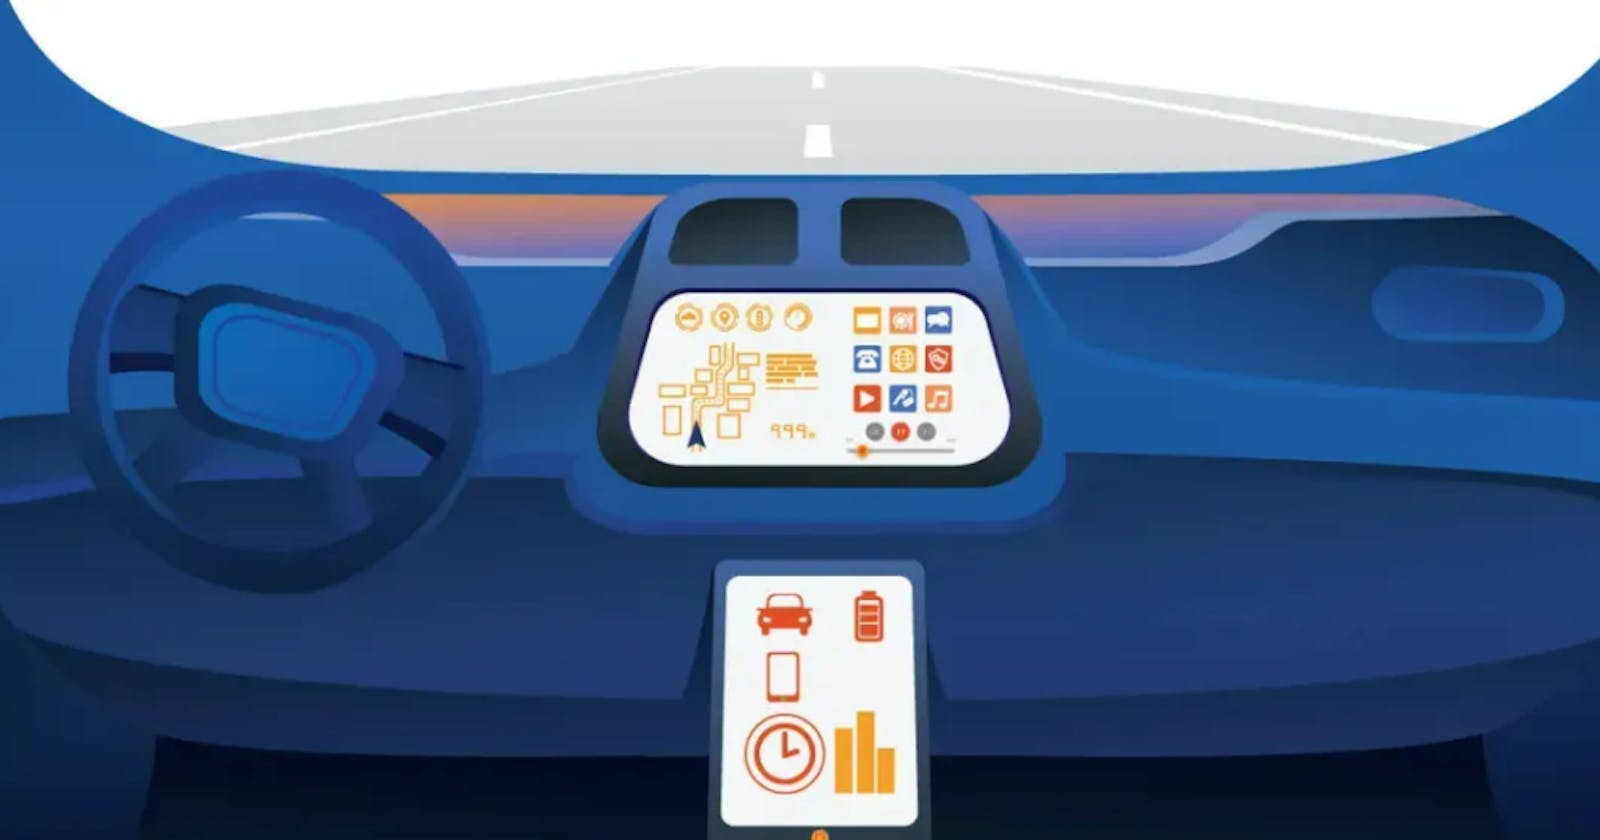 Driving the user experiences of Connected Cars — A new era of automobile testing